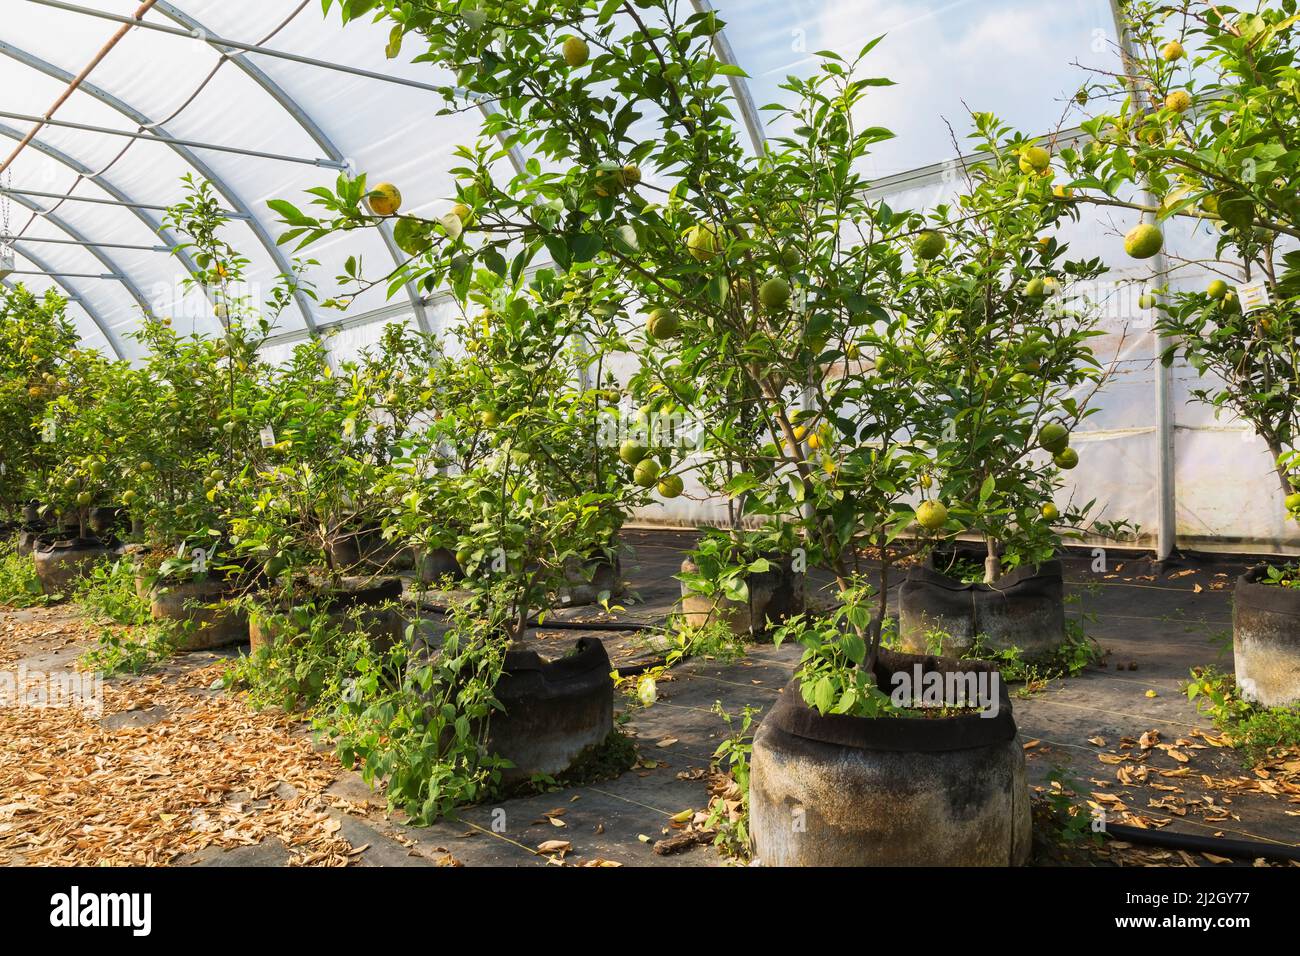 Citrus aurantiifolia - Lime fruit trees growing inside commercial greenhouse, Quebec, Canada Stock Photo